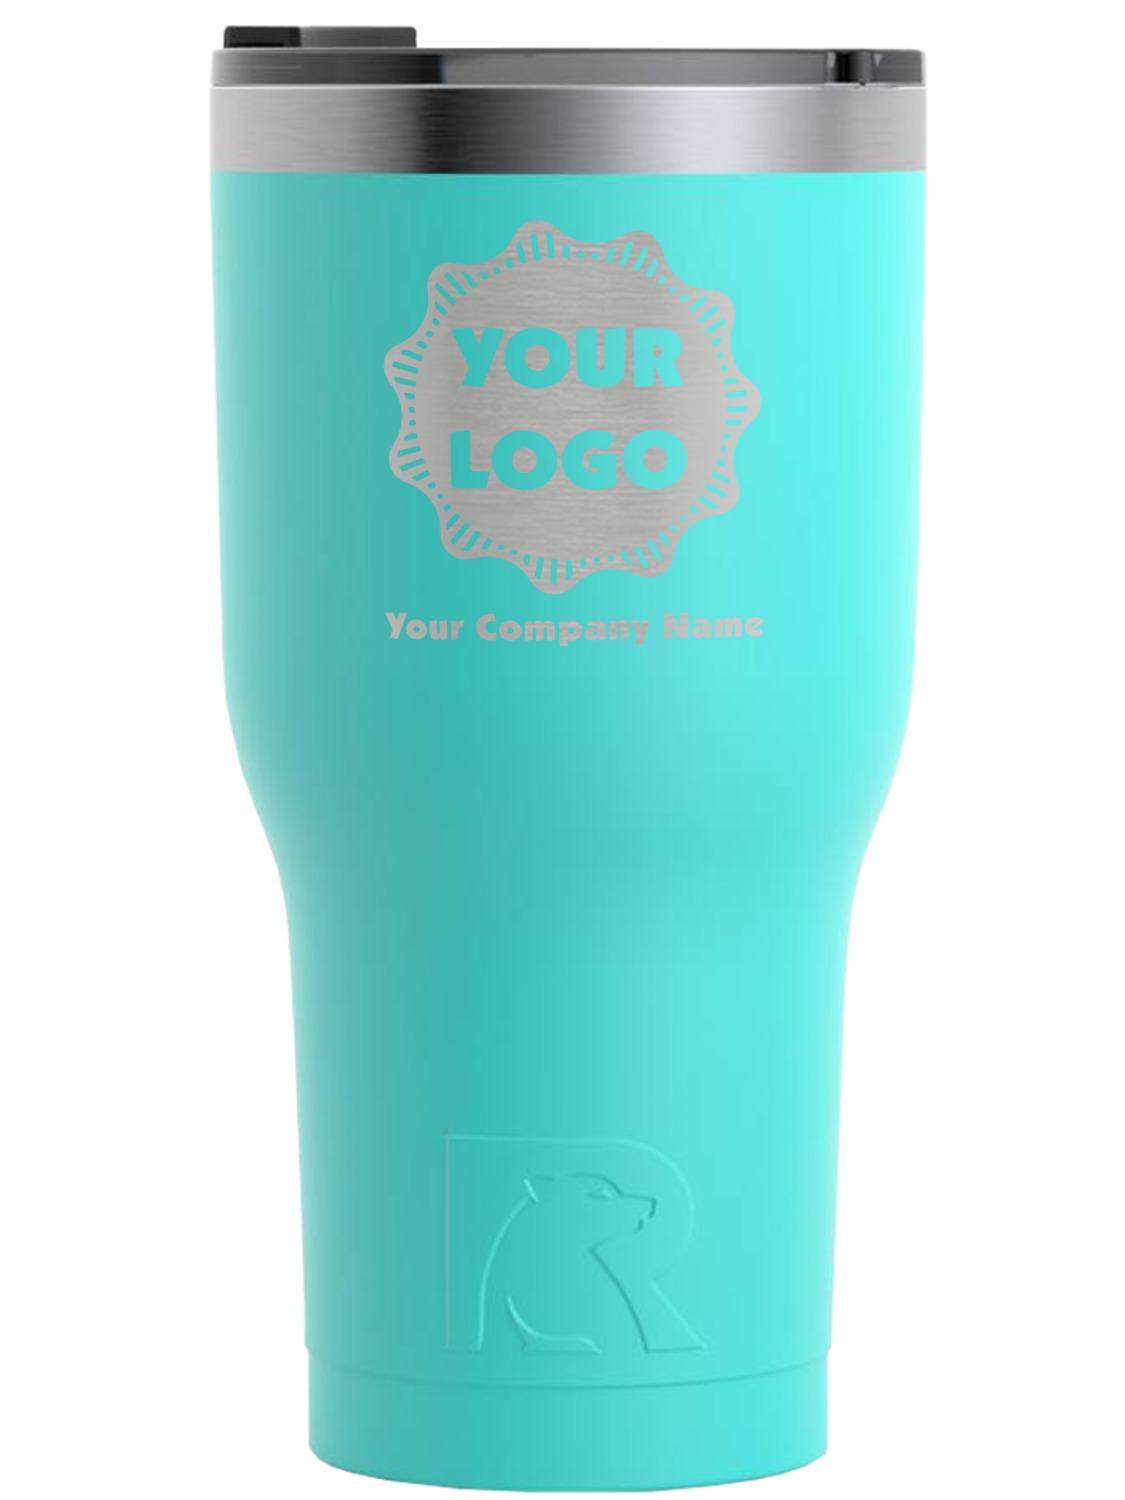 RTIC Double Wall Vacuum Insulated Tumbler, 40 oz, Teal 